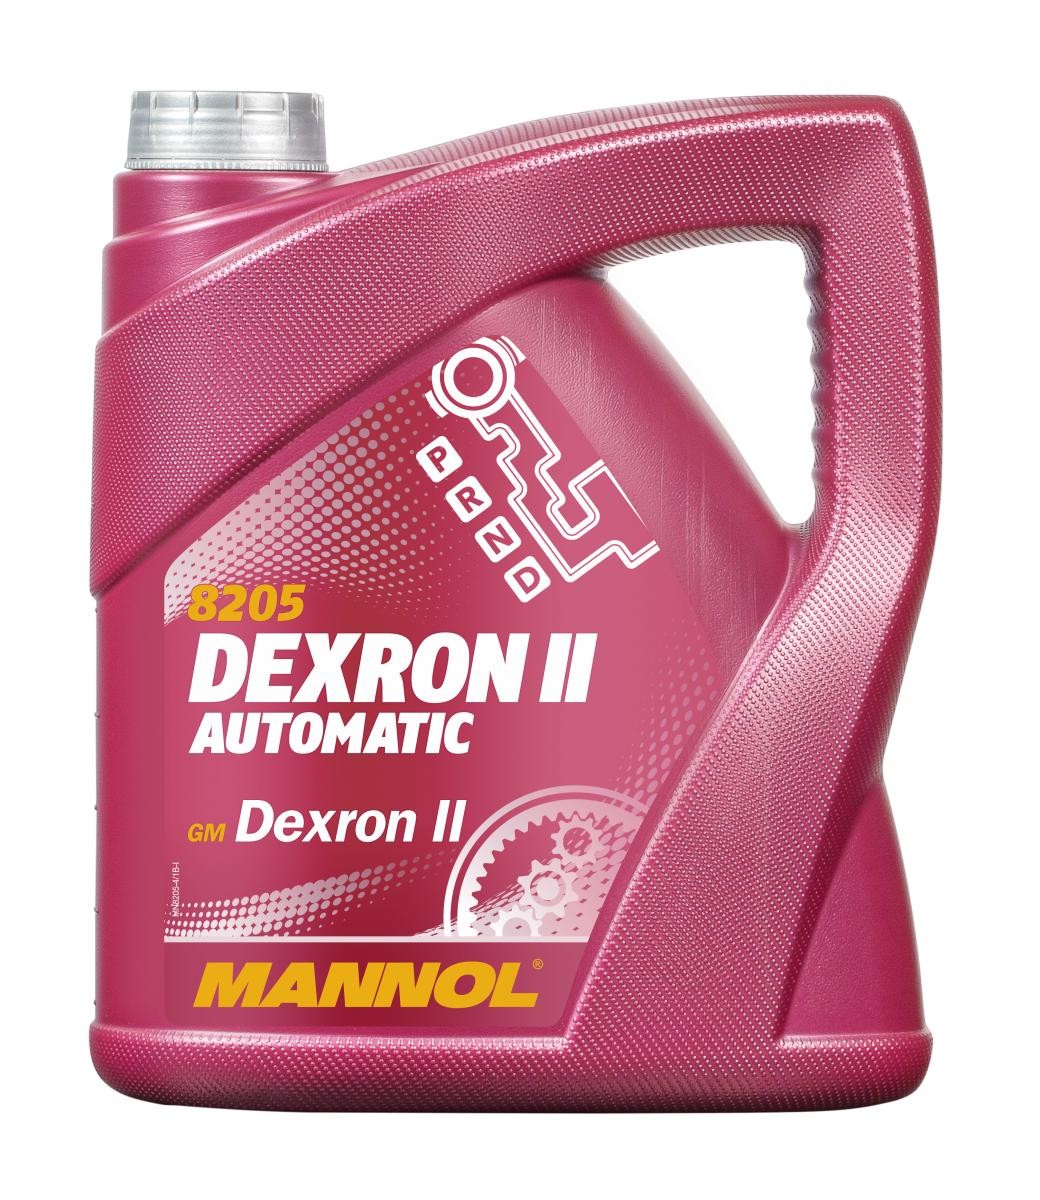 MANNOL DEXRON II Automatic ATF II, 4l, red Automatic transmission oil MN8205-4 buy